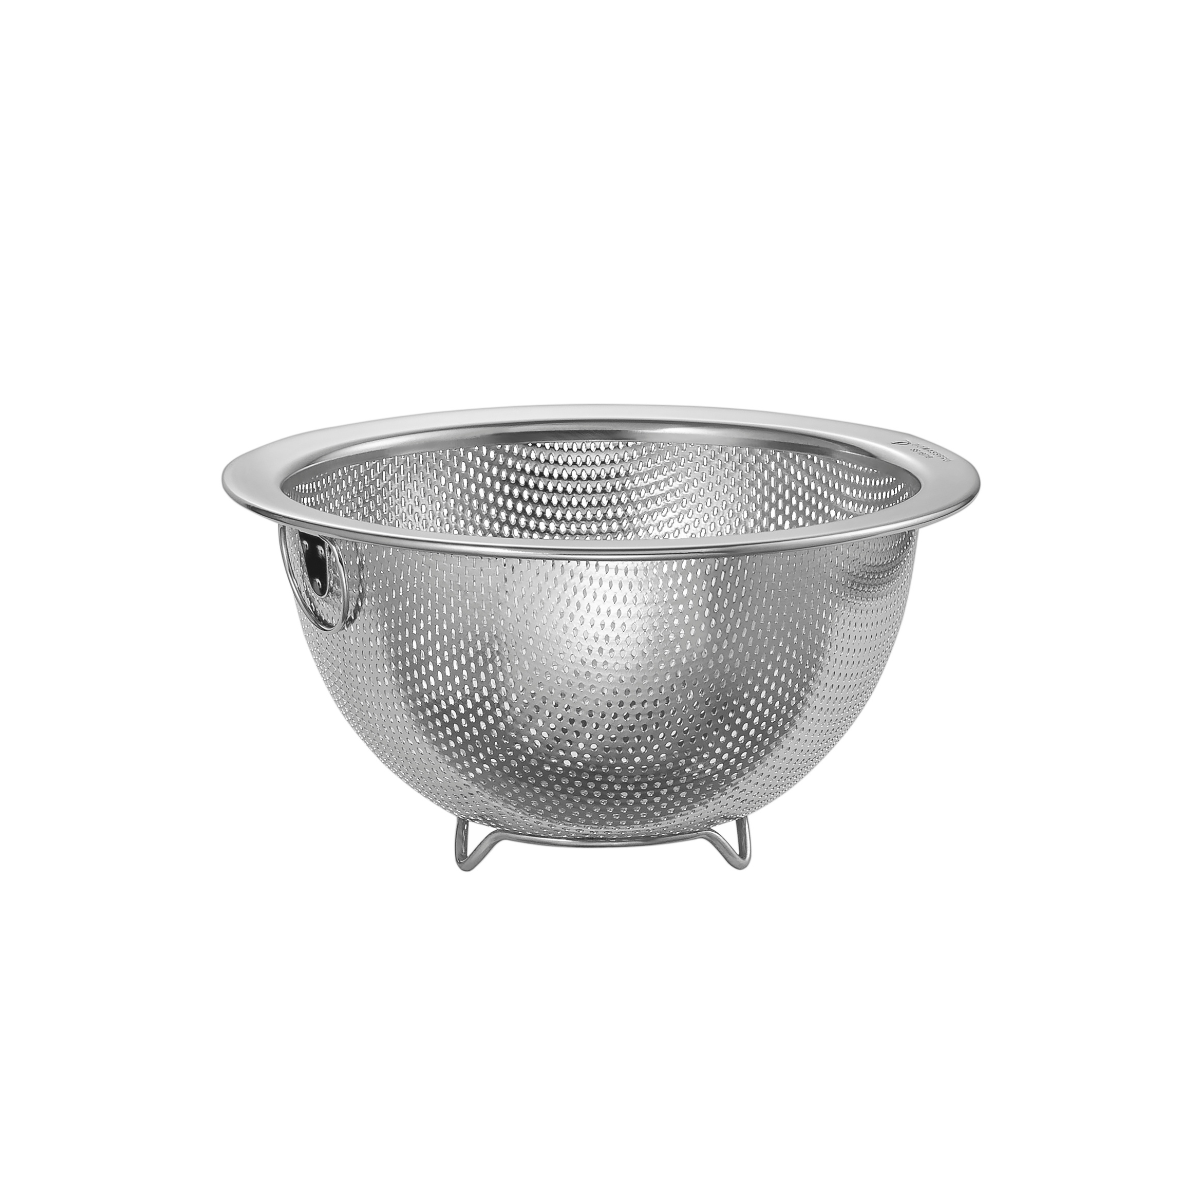 BX® STRAINER STAINLESS STEEL 18/10